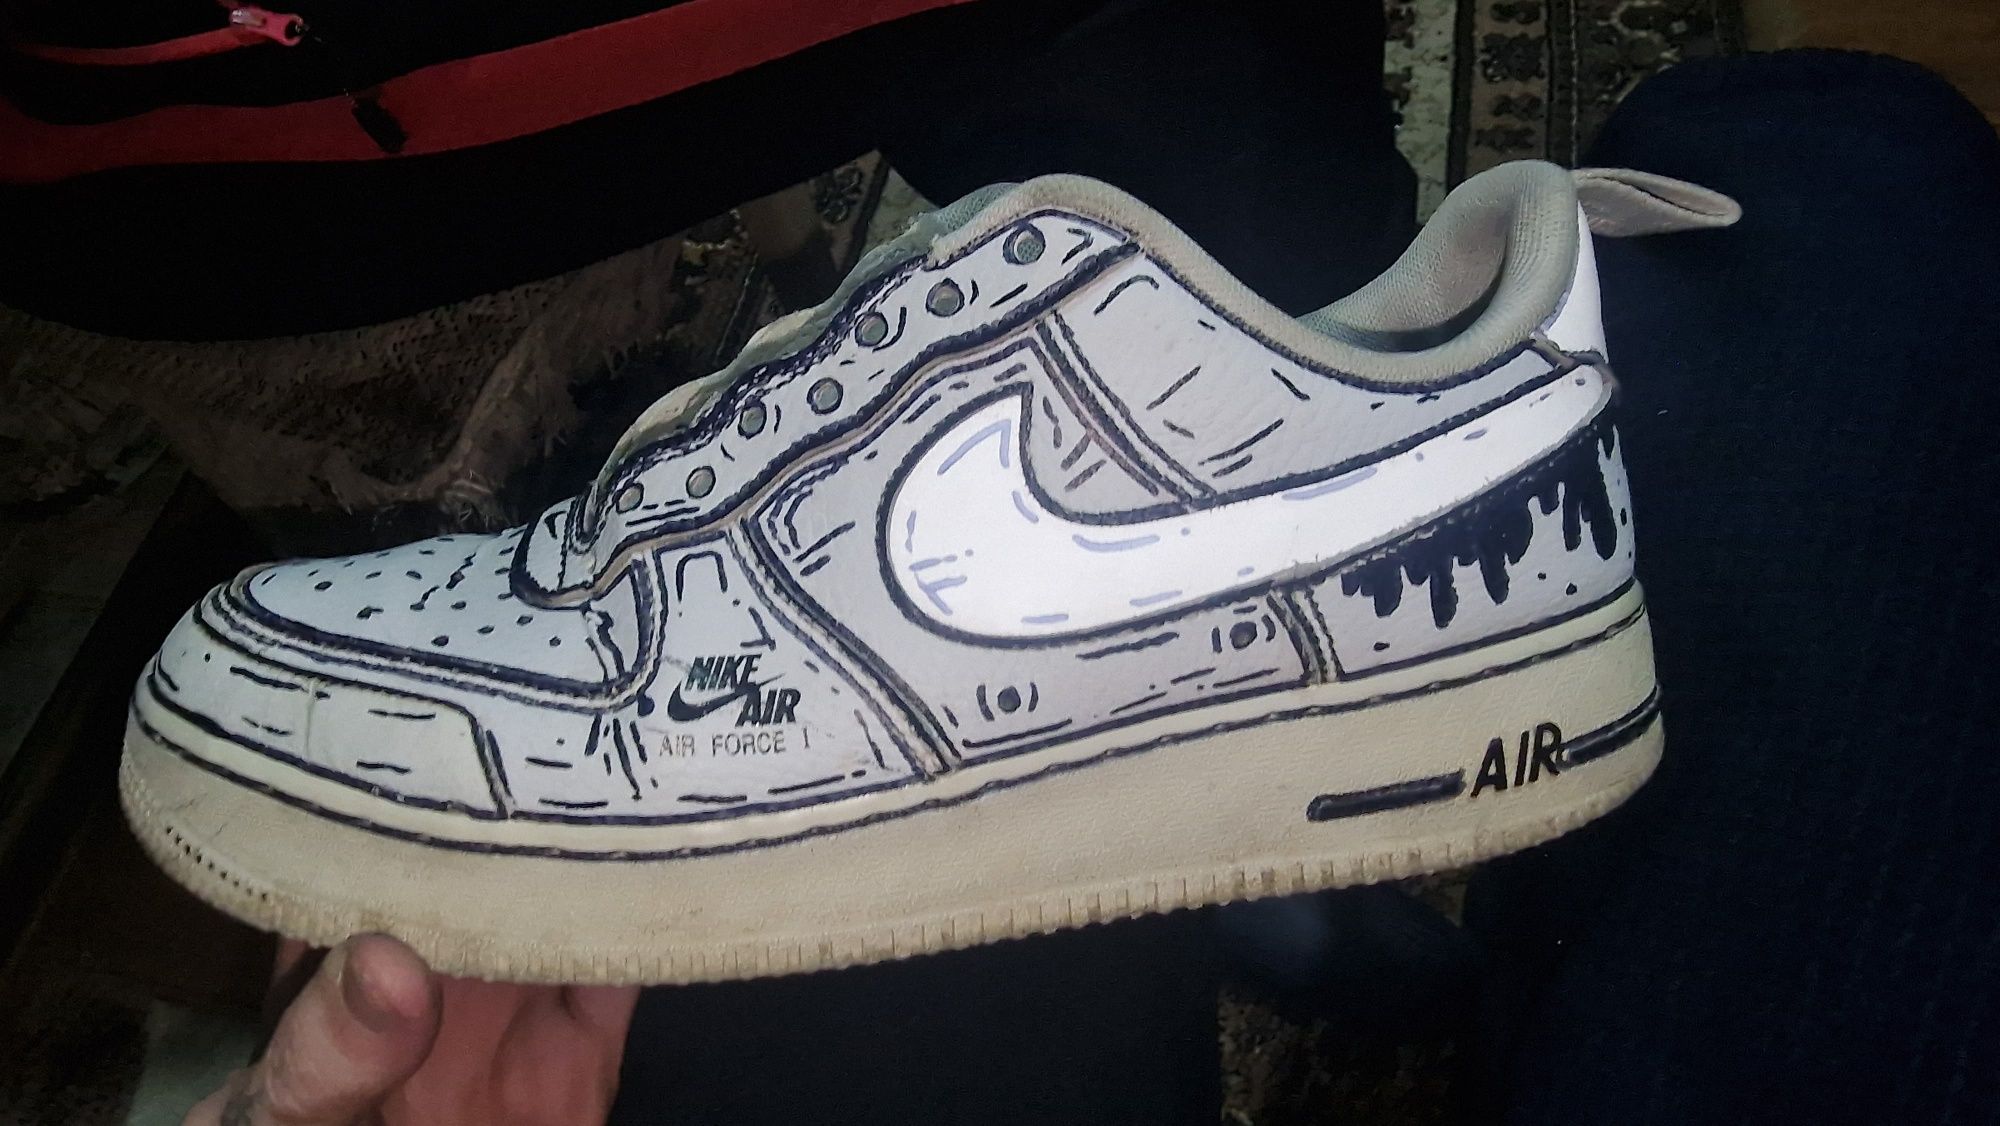 Air force one noi